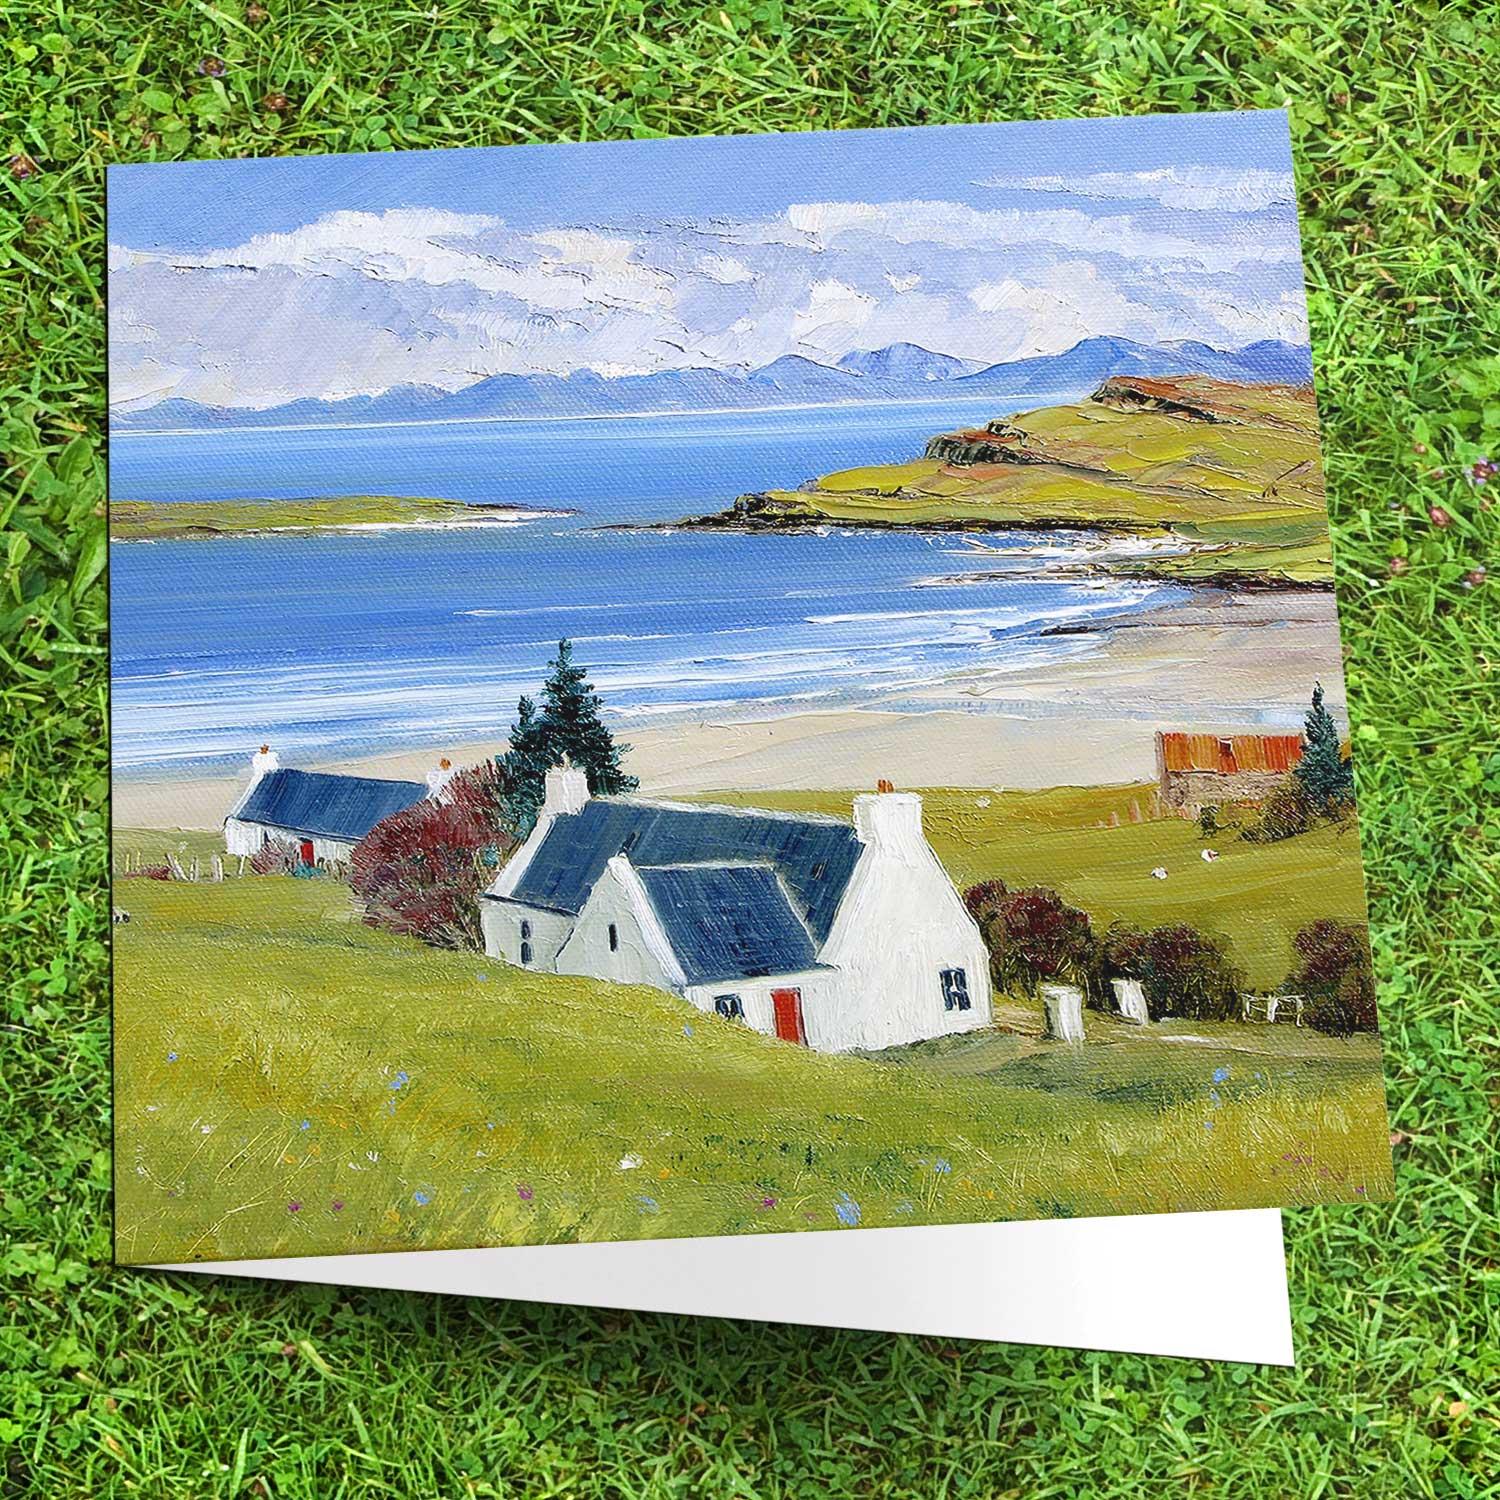 Staffin Bay Greeting Card from an original painting by artist John Bathgate